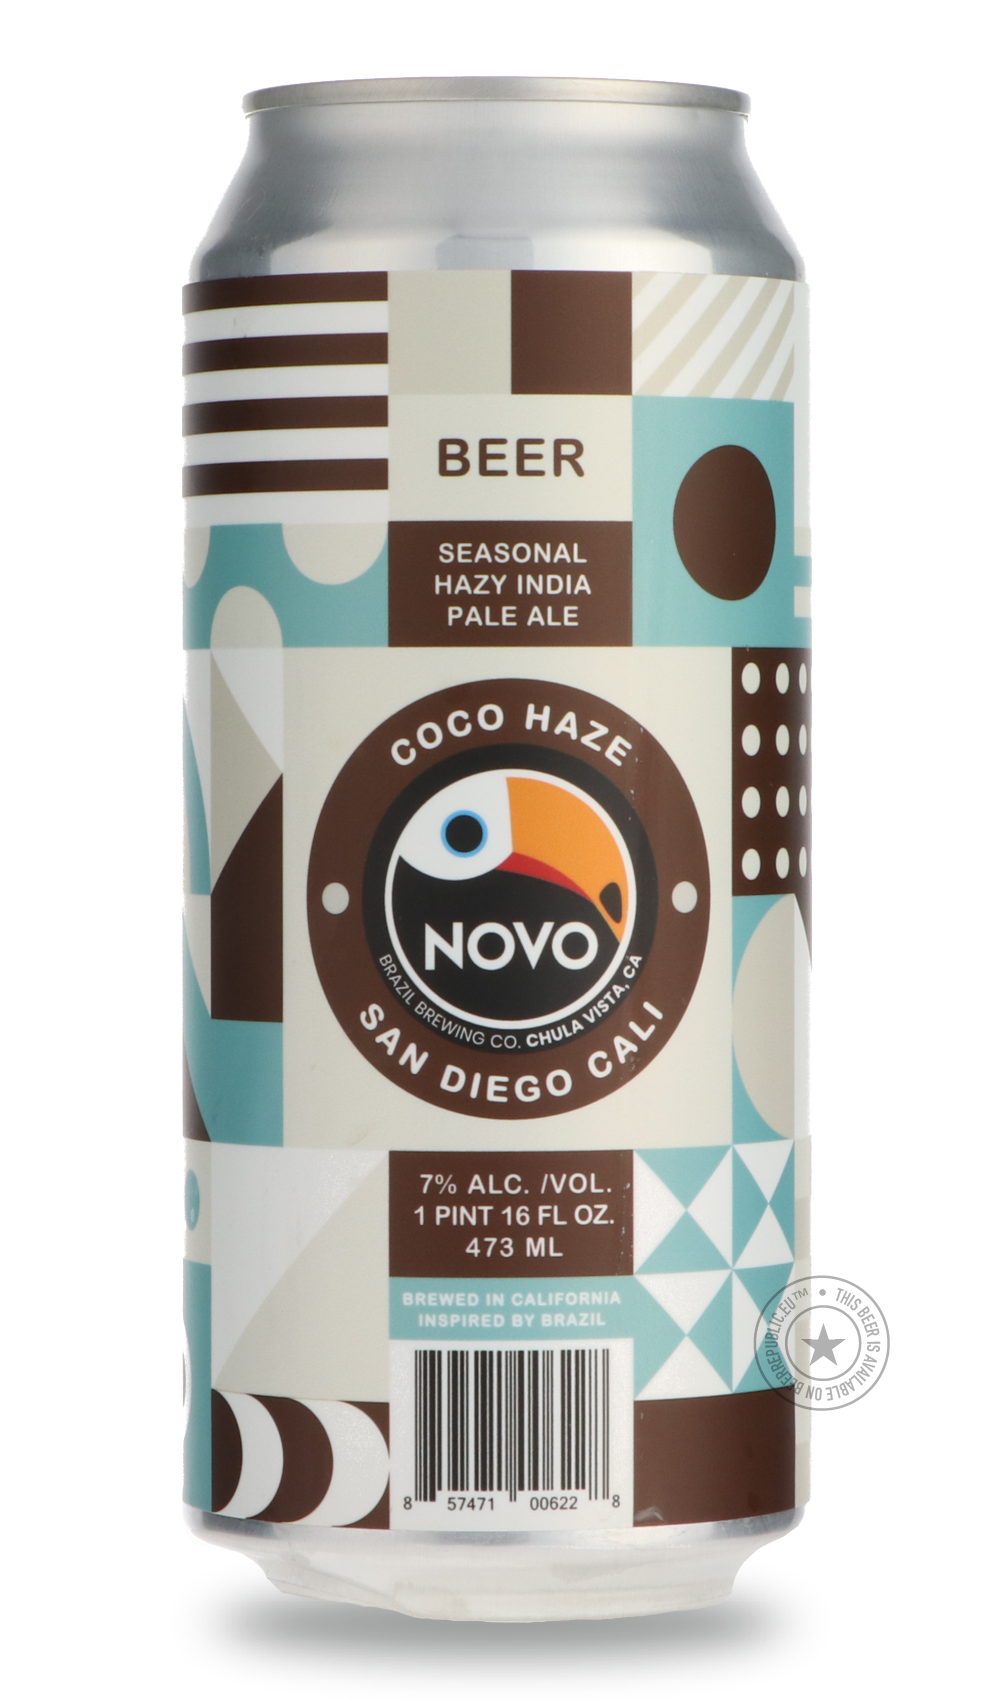 -Novo Brazil- Coco Haze-IPA- Only @ Beer Republic - The best online beer store for American & Canadian craft beer - Buy beer online from the USA and Canada - Bier online kopen - Amerikaans bier kopen - Craft beer store - Craft beer kopen - Amerikanisch bier kaufen - Bier online kaufen - Acheter biere online - IPA - Stout - Porter - New England IPA - Hazy IPA - Imperial Stout - Barrel Aged - Barrel Aged Imperial Stout - Brown - Dark beer - Blond - Blonde - Pilsner - Lager - Wheat - Weizen - Amber - Barley Wi